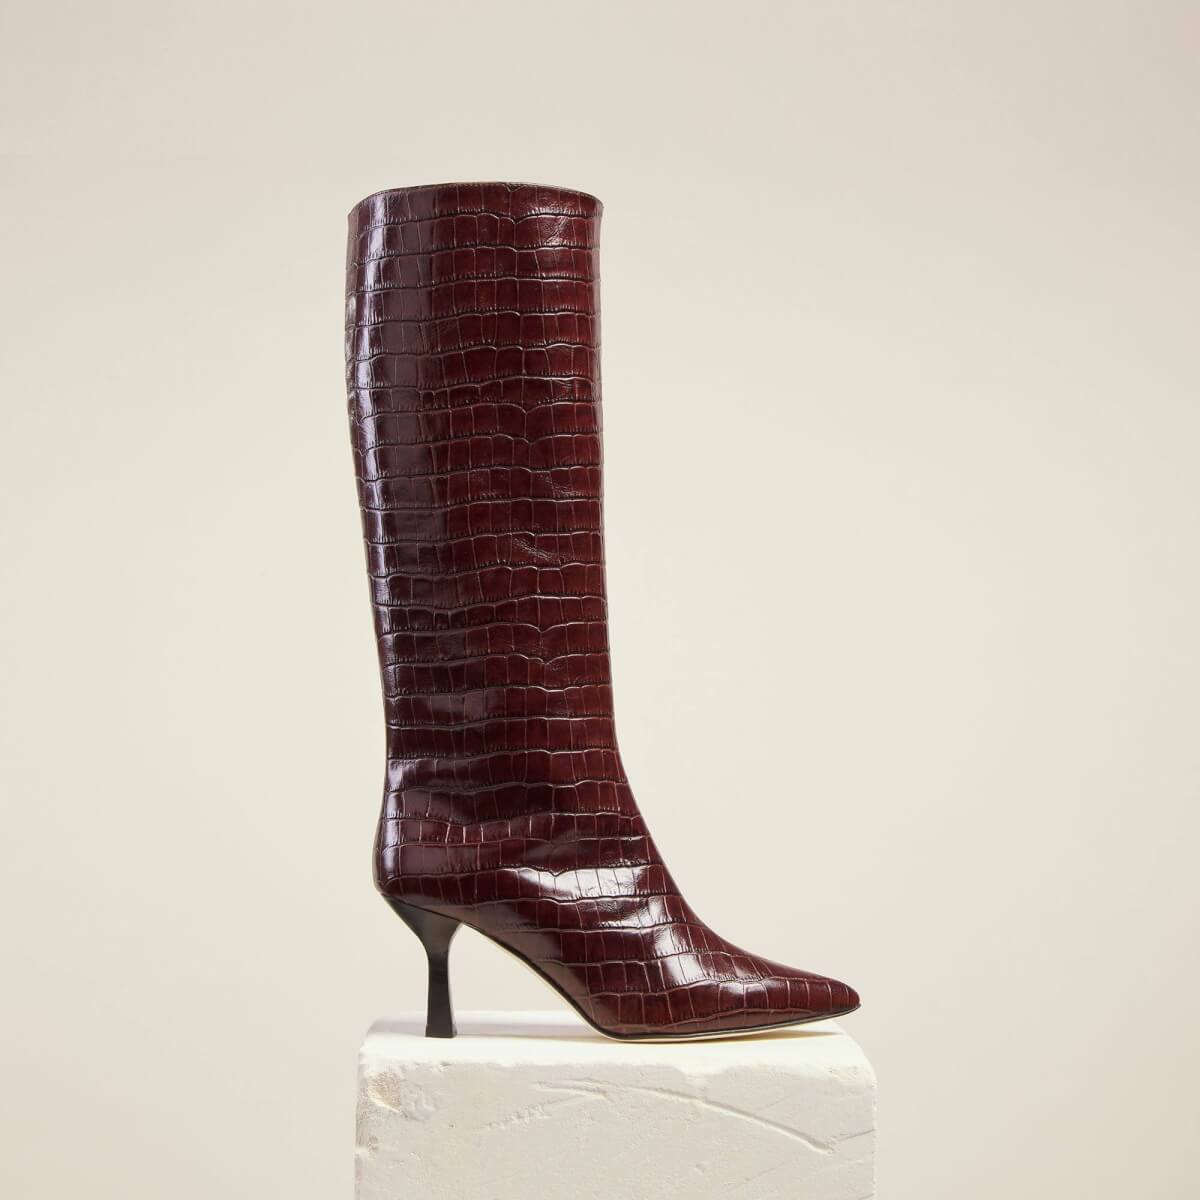 Dear Frances – Brown Croc Leather Pull On Pointed Toe Knee High Boots £795.00